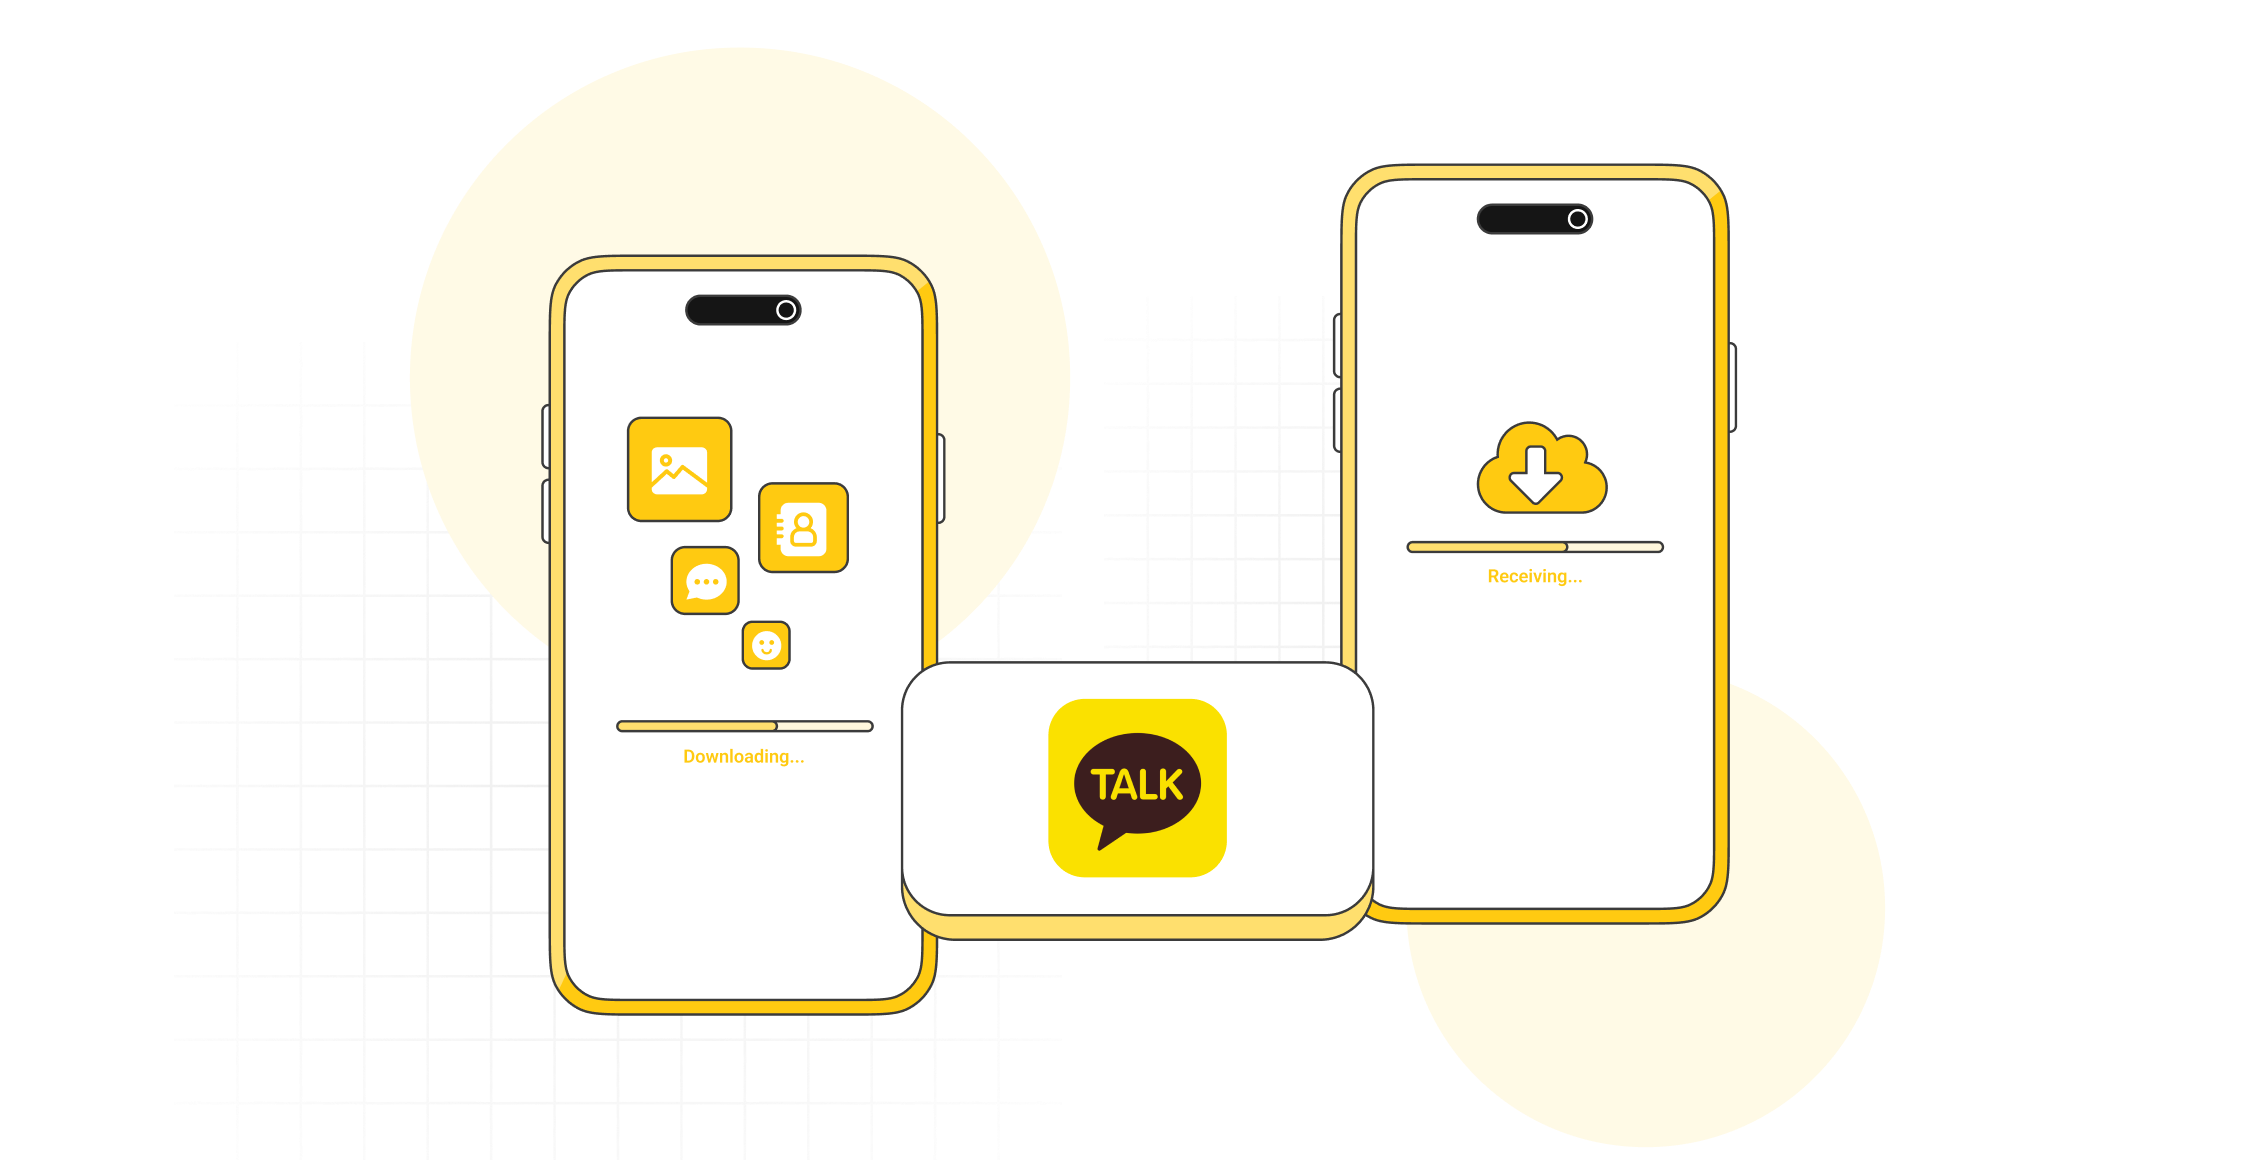 One-Click Transfer KakaoTalk between iOS devices Securely